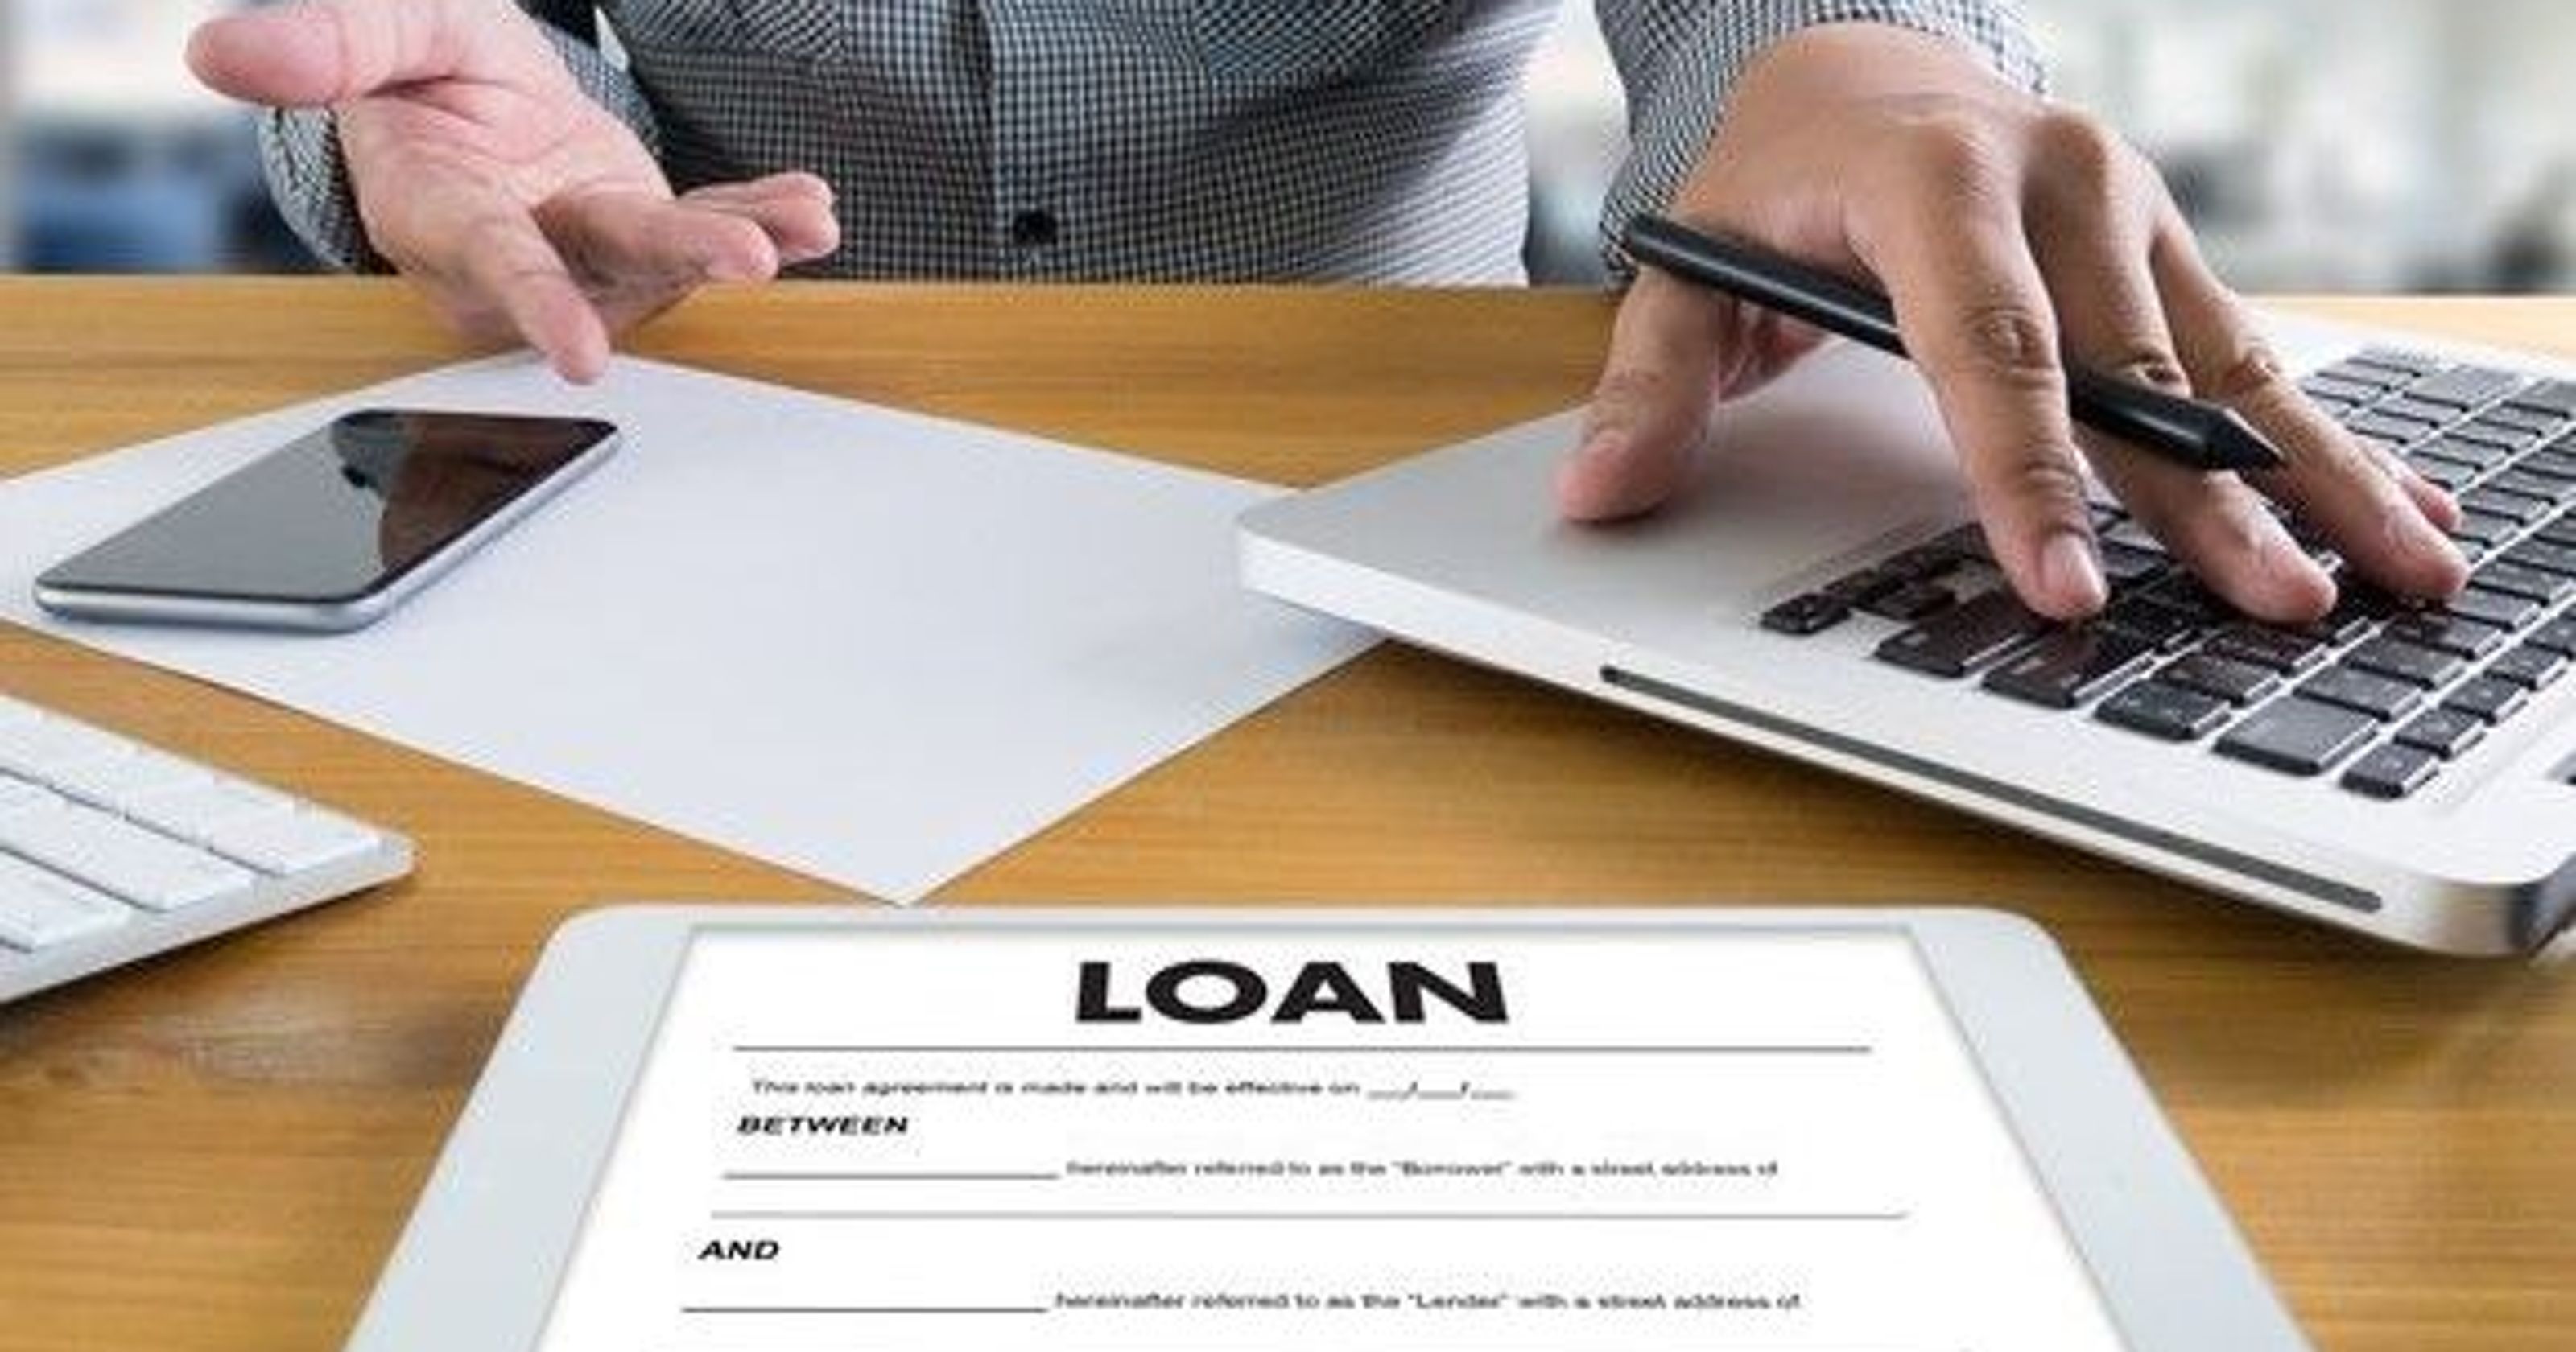 What are payday loans and what are the benefits?